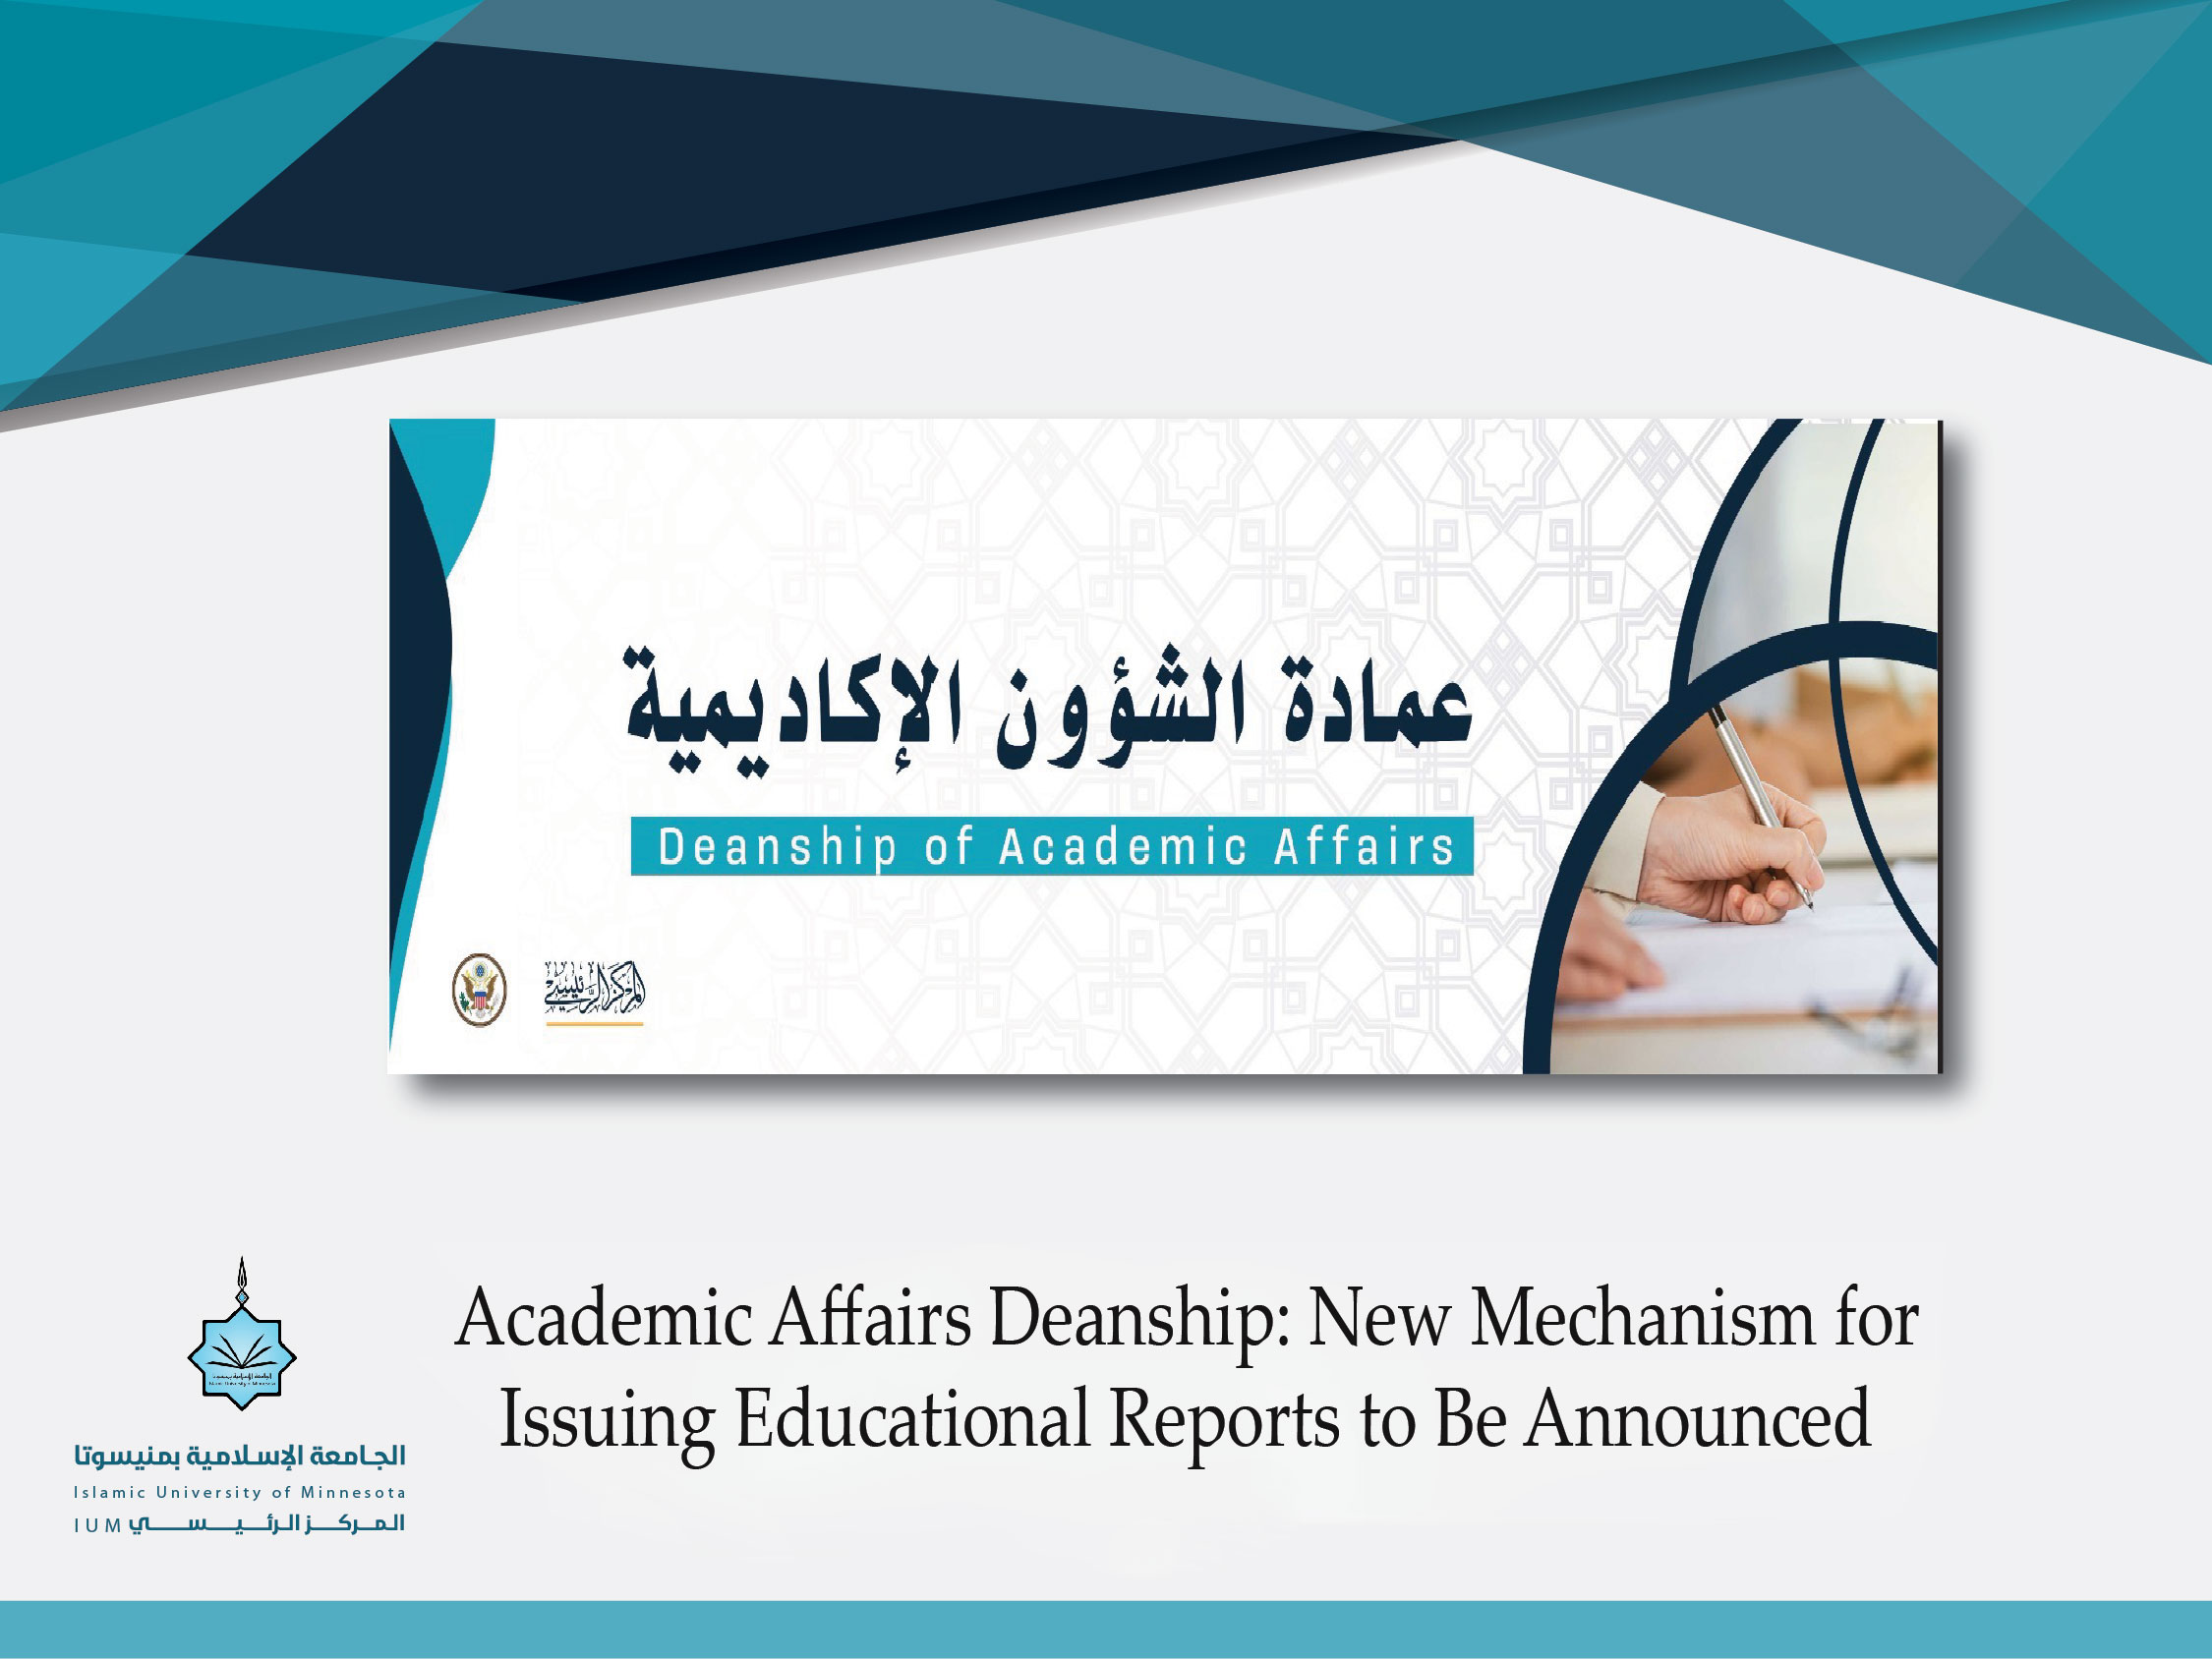 Academic Affairs Deanship: New Mechanism for Issuing Educational Reports to Be Announced